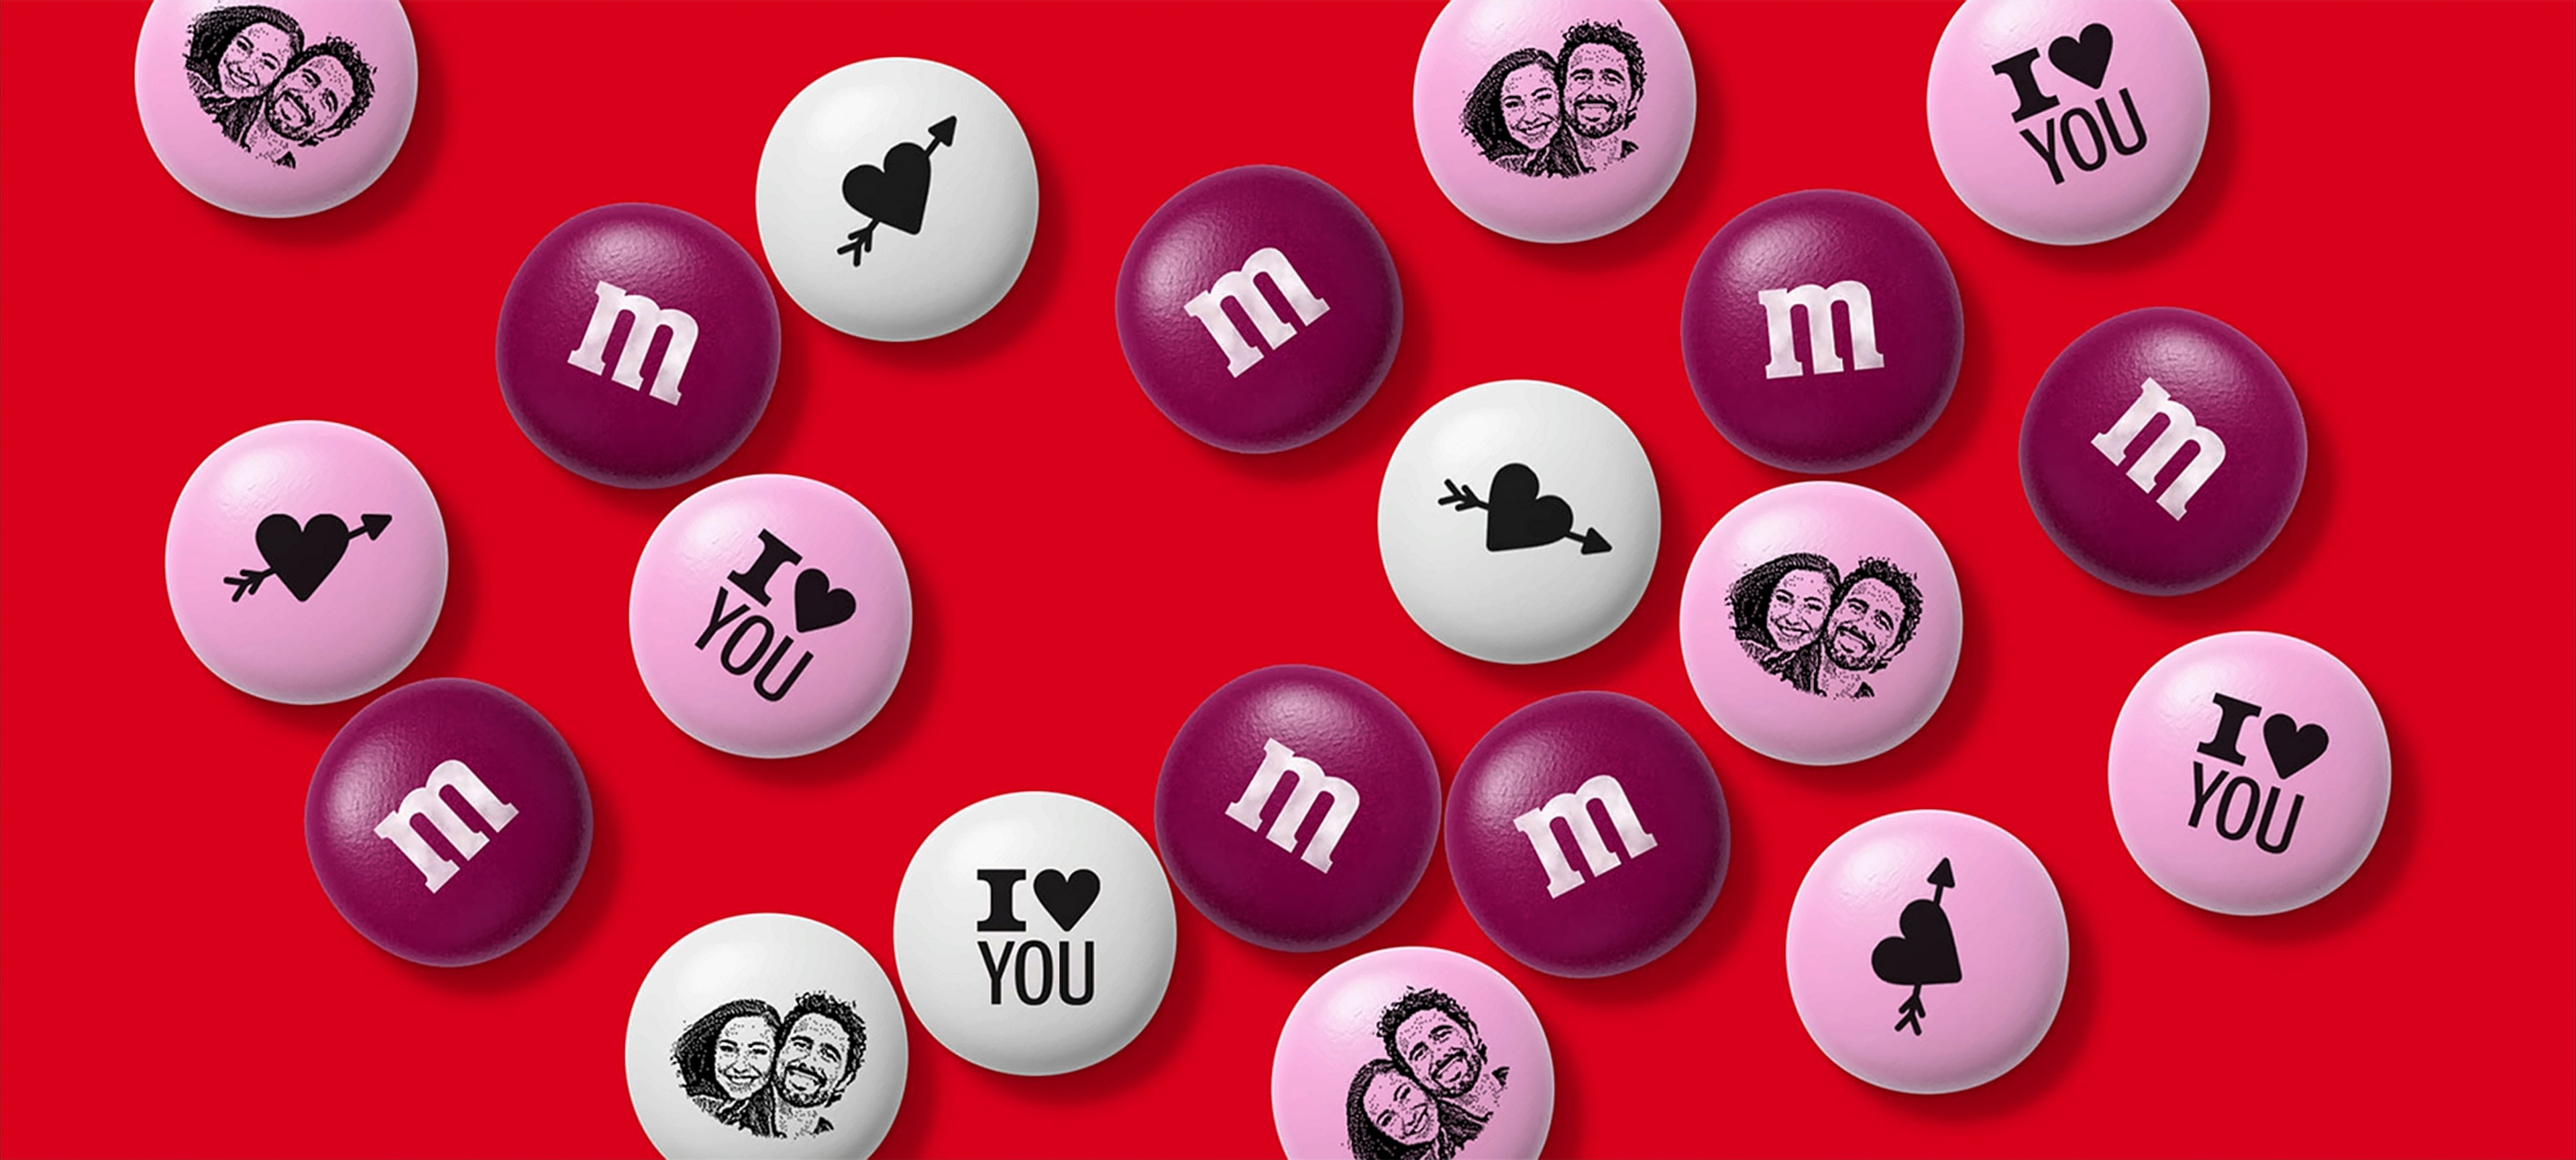 Personalized M&M's - MyMMs.com